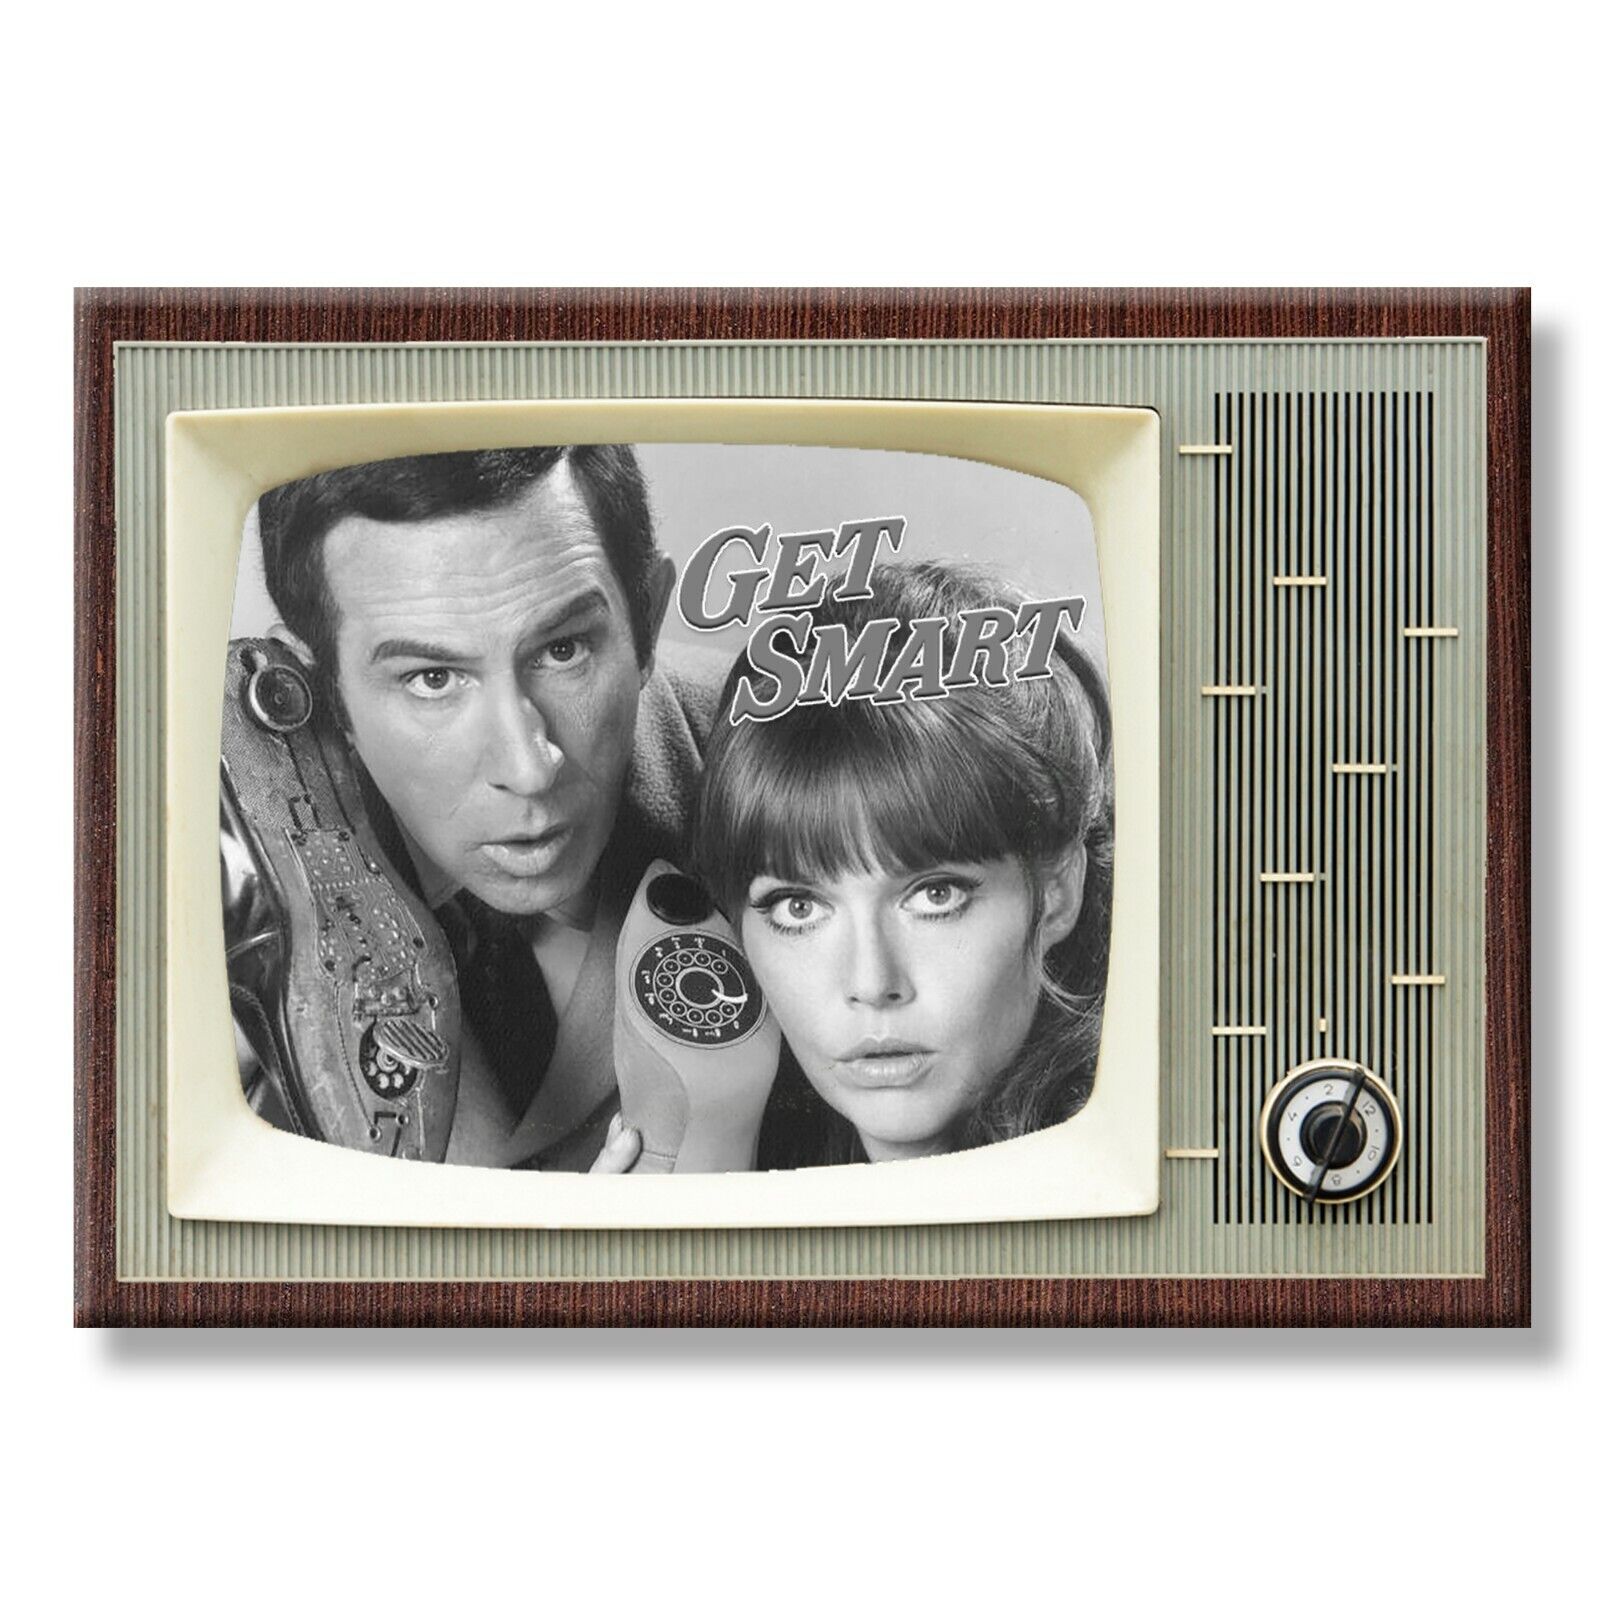 GET SMART Classic TV 3.5 inches x 2.5 inches Steel FRIDGE MAGNET